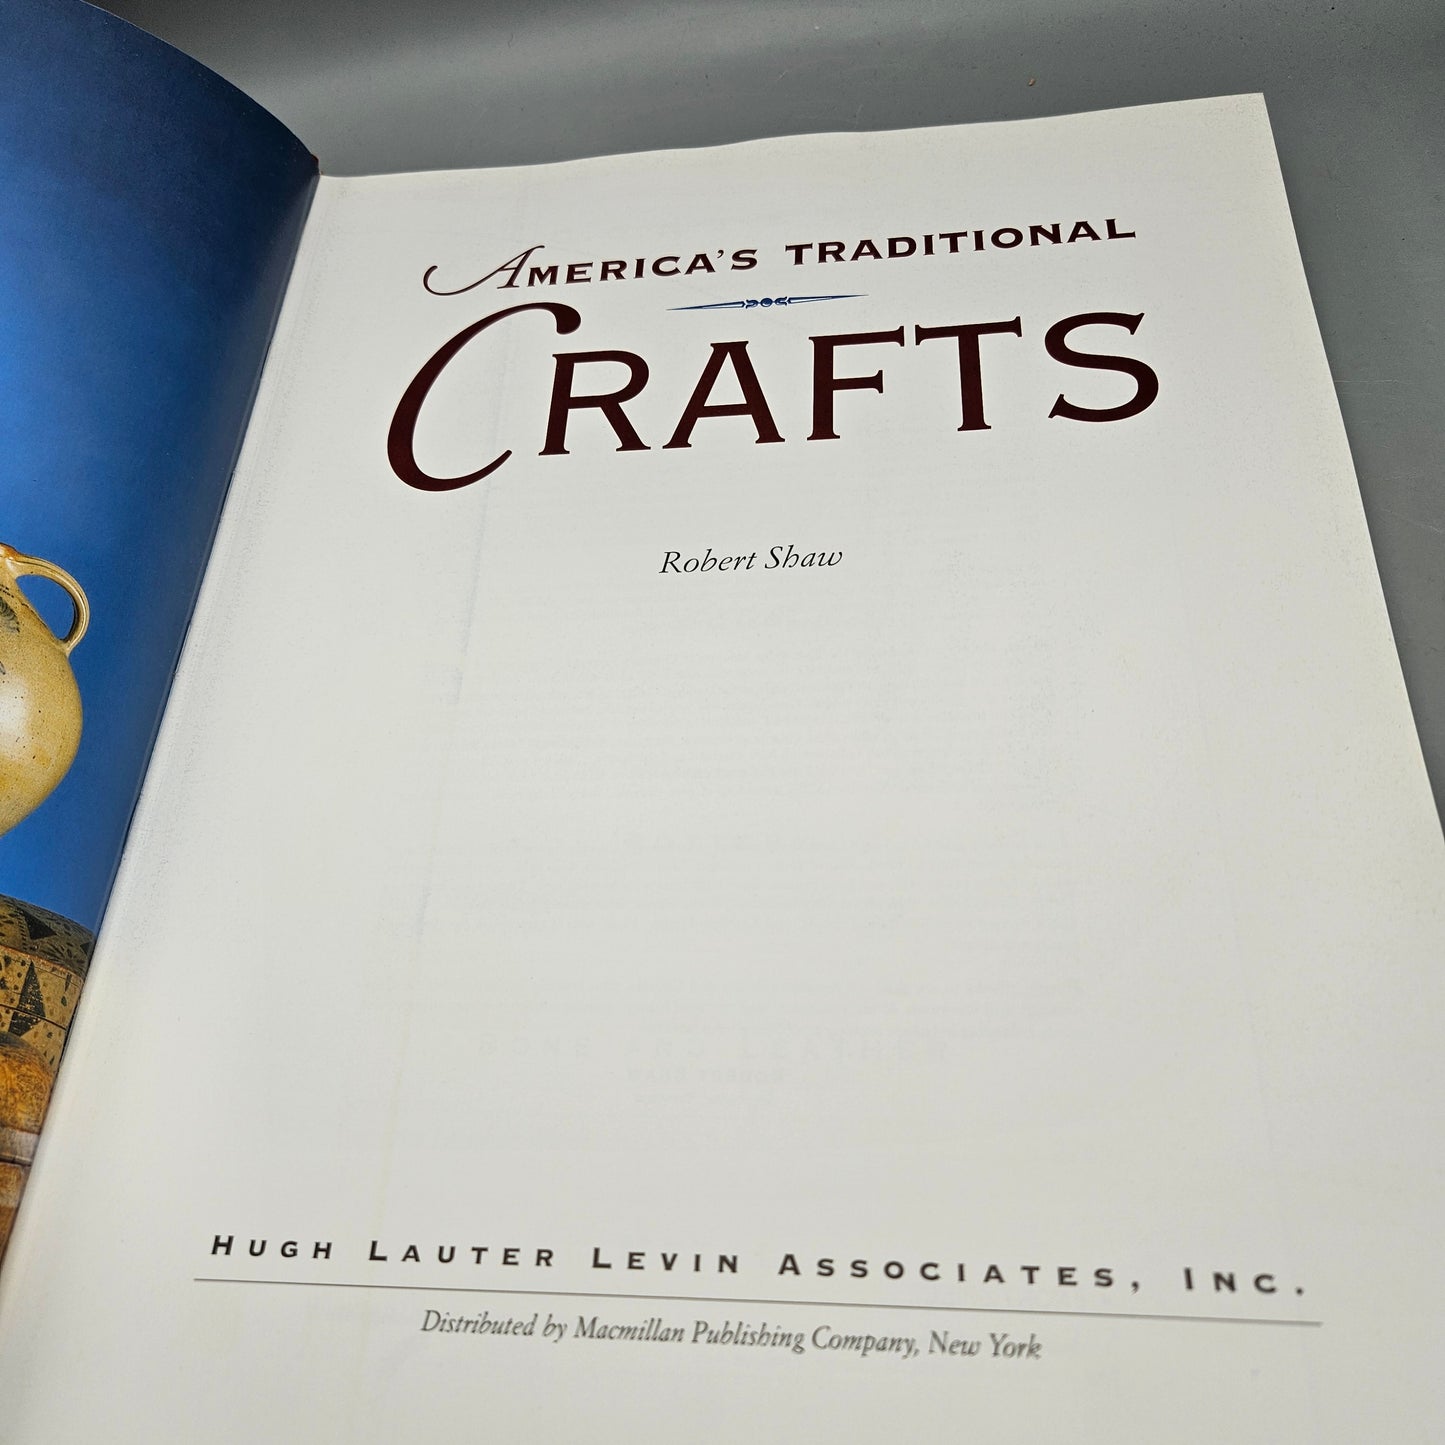 Book: America's Traditional Crafts by Robert Shaw